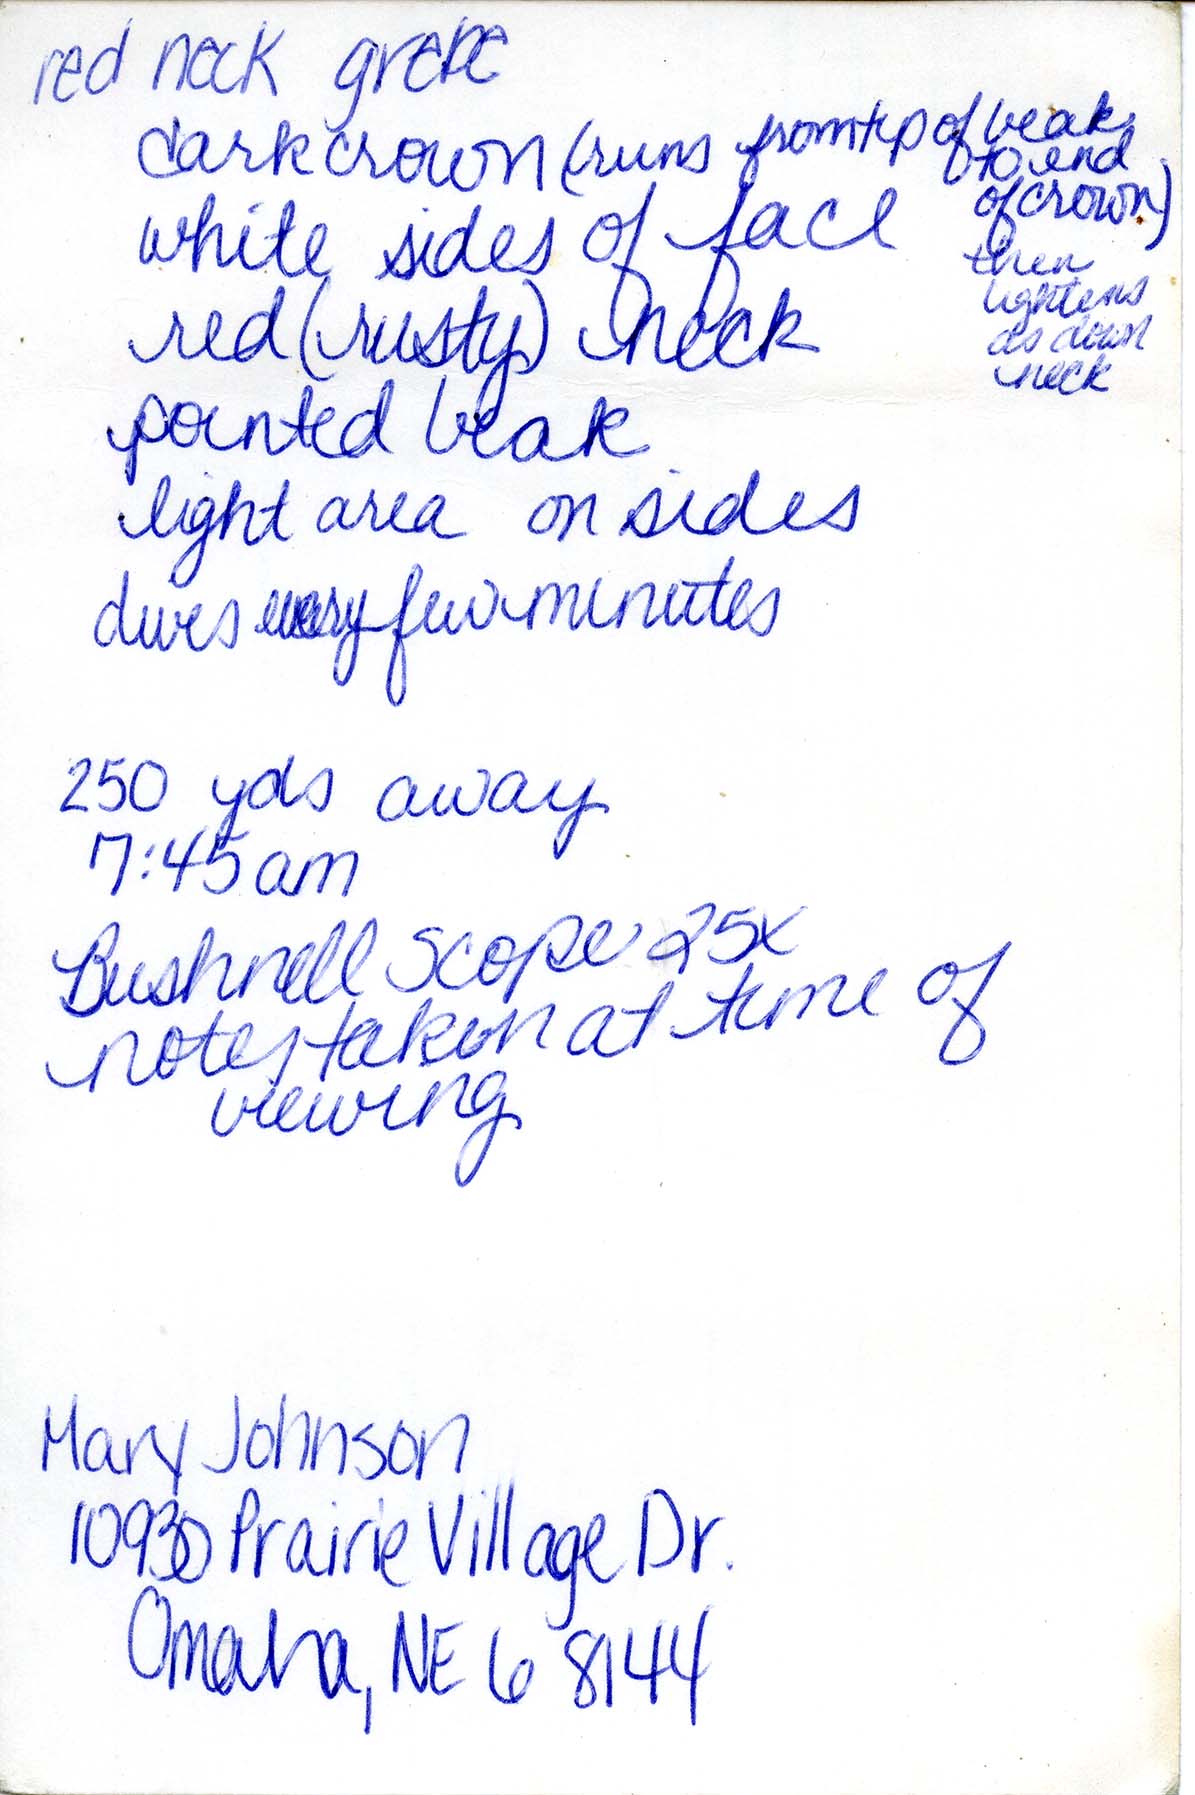 Field notes contributed by Mary Johnson, spring 1988